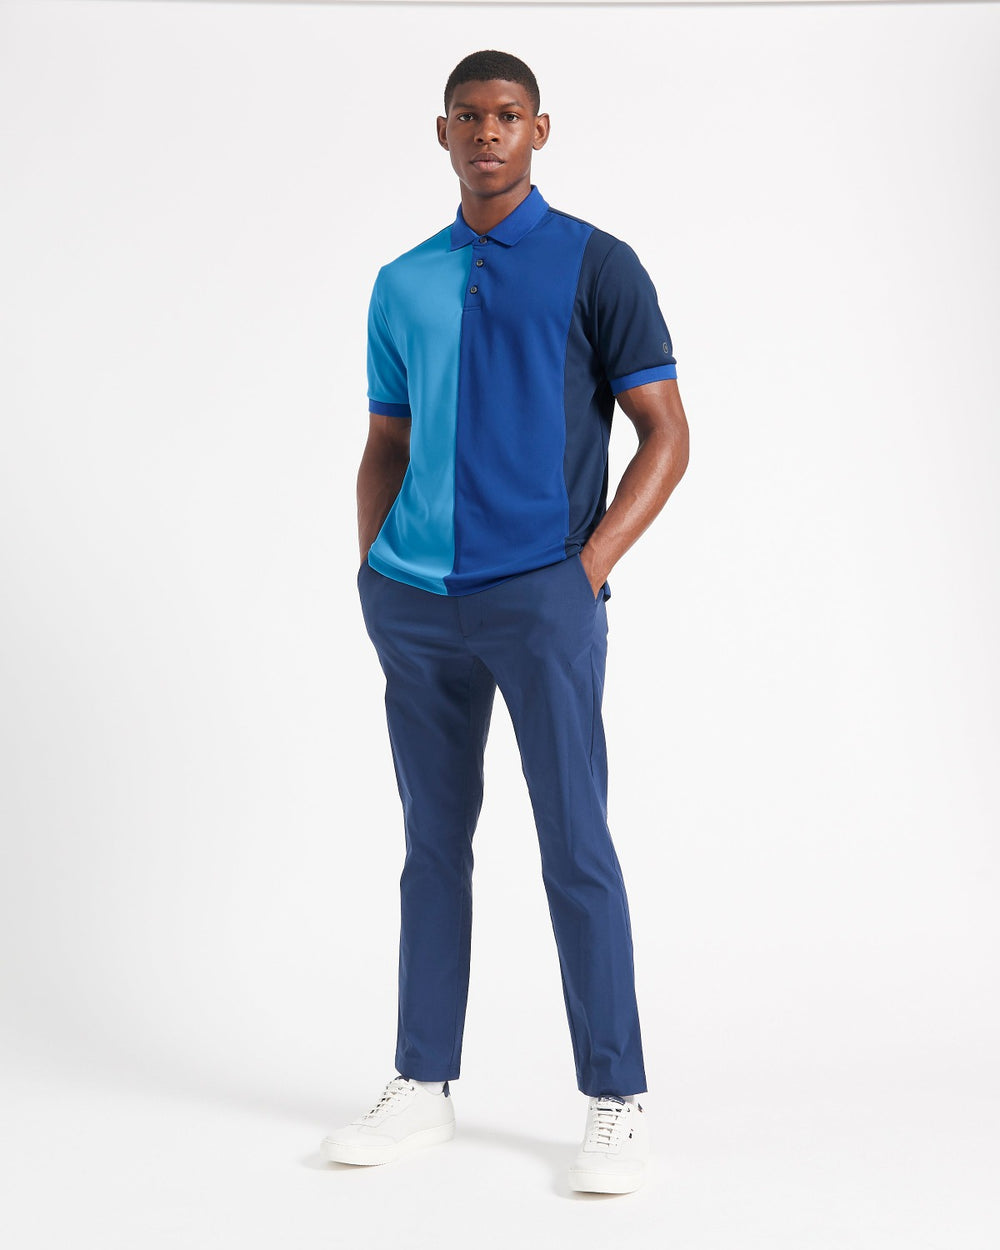 360 Motion Stretch Colorblock Polo - Blue/Navy